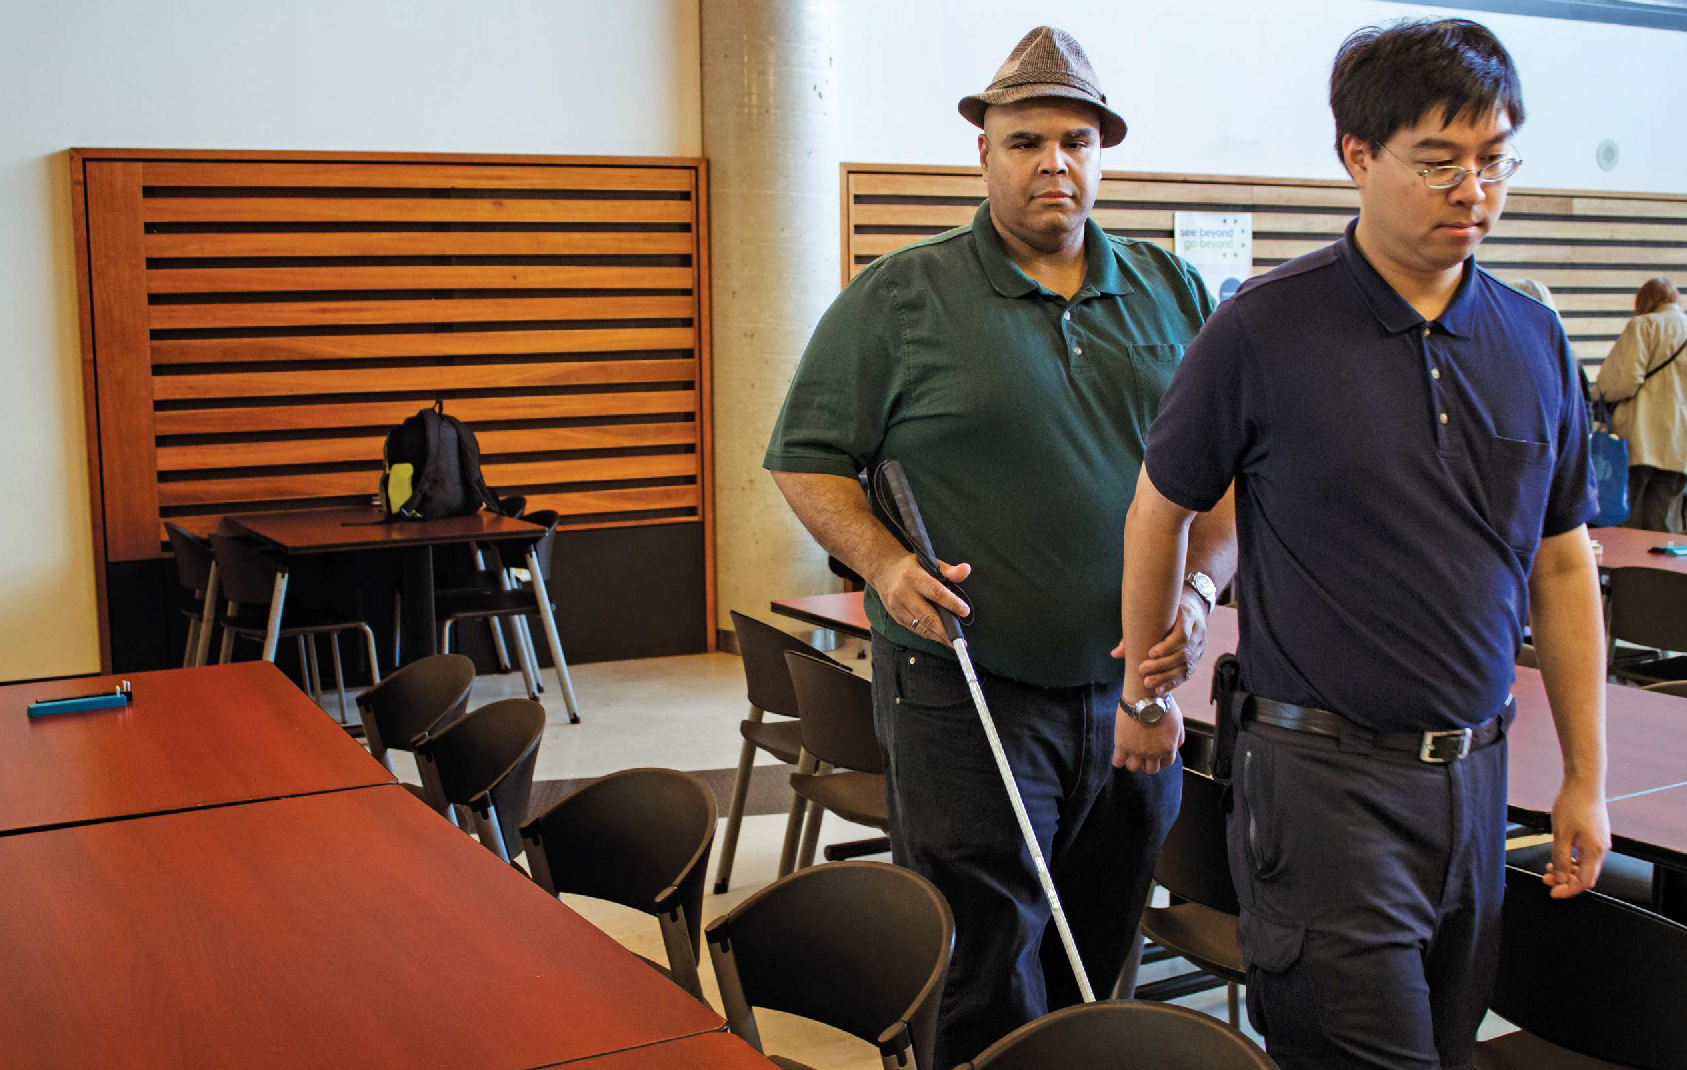 A person provides a sighted guide to an individual with sight loss.